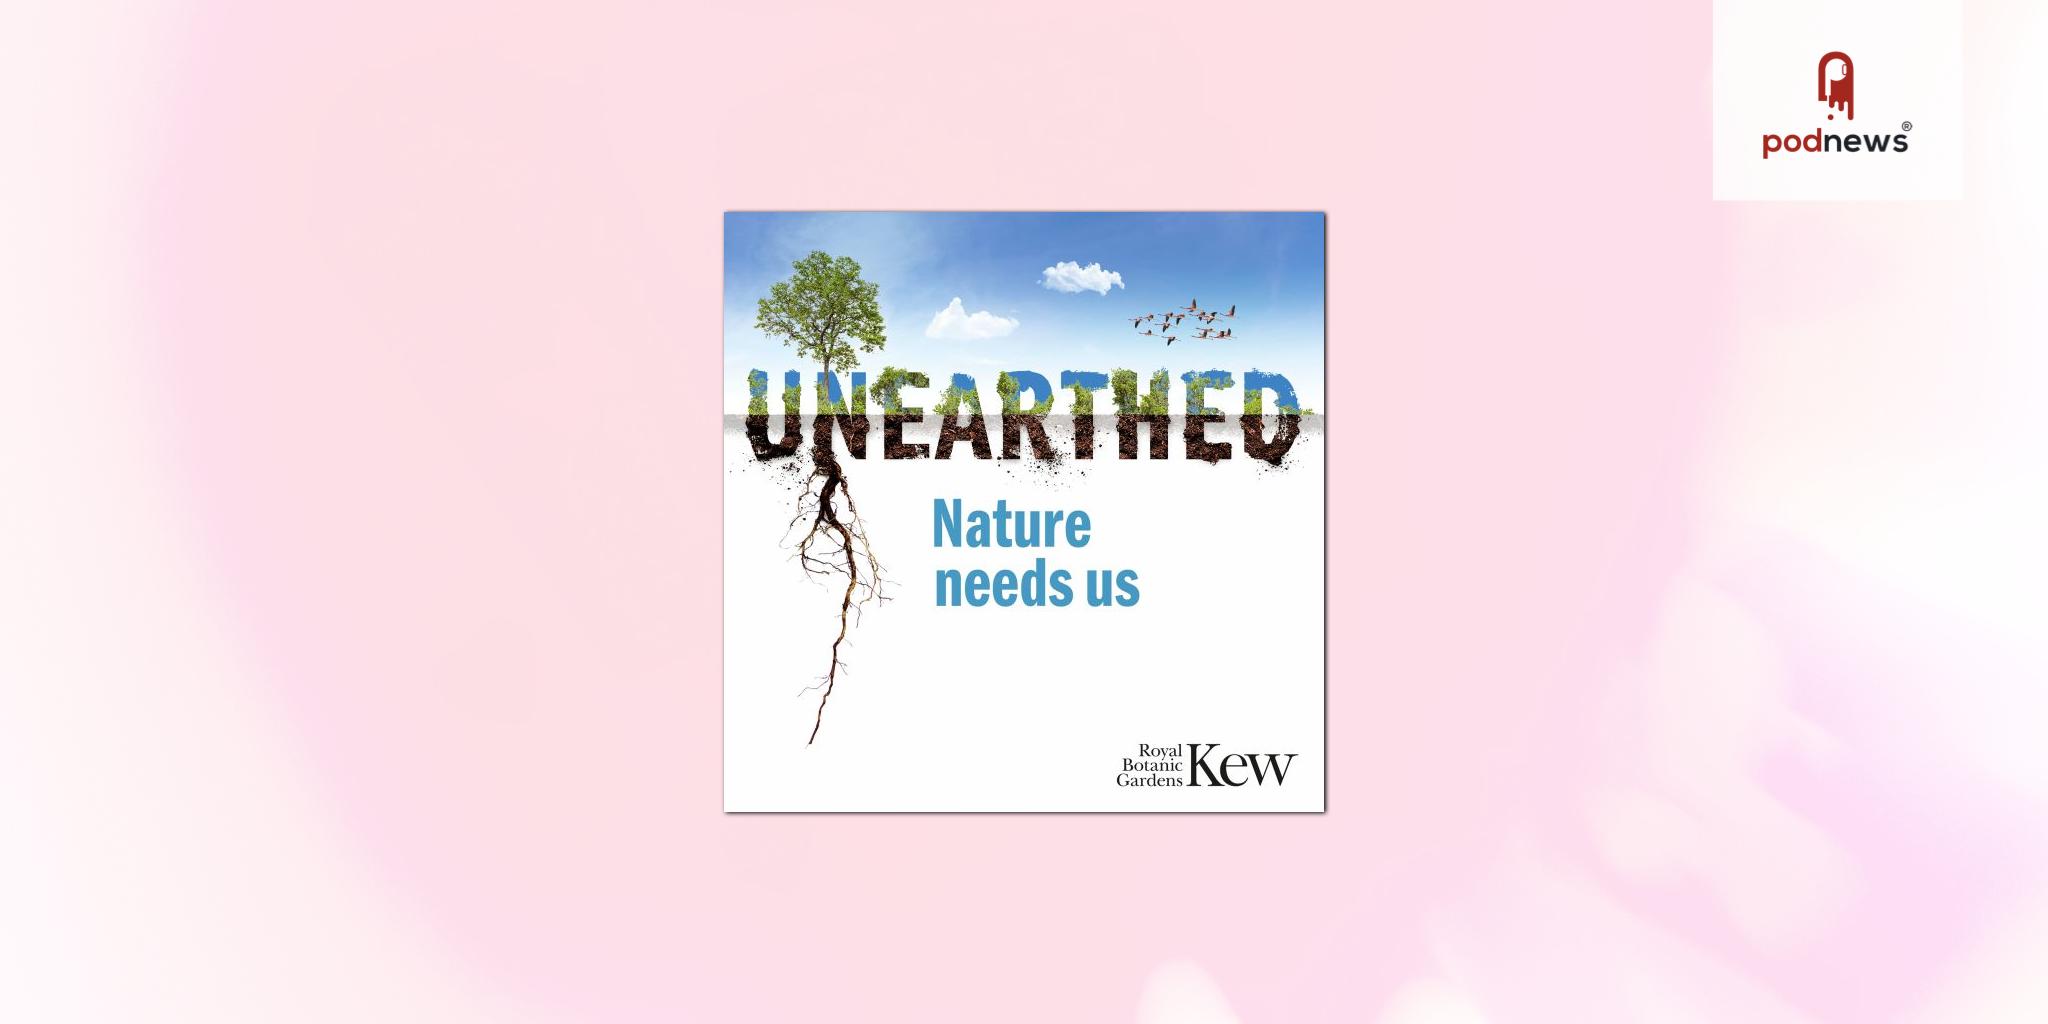 Royal Botanic Gardens, Kew’s podcast returns with a third series of Unearthed: Nature needs us